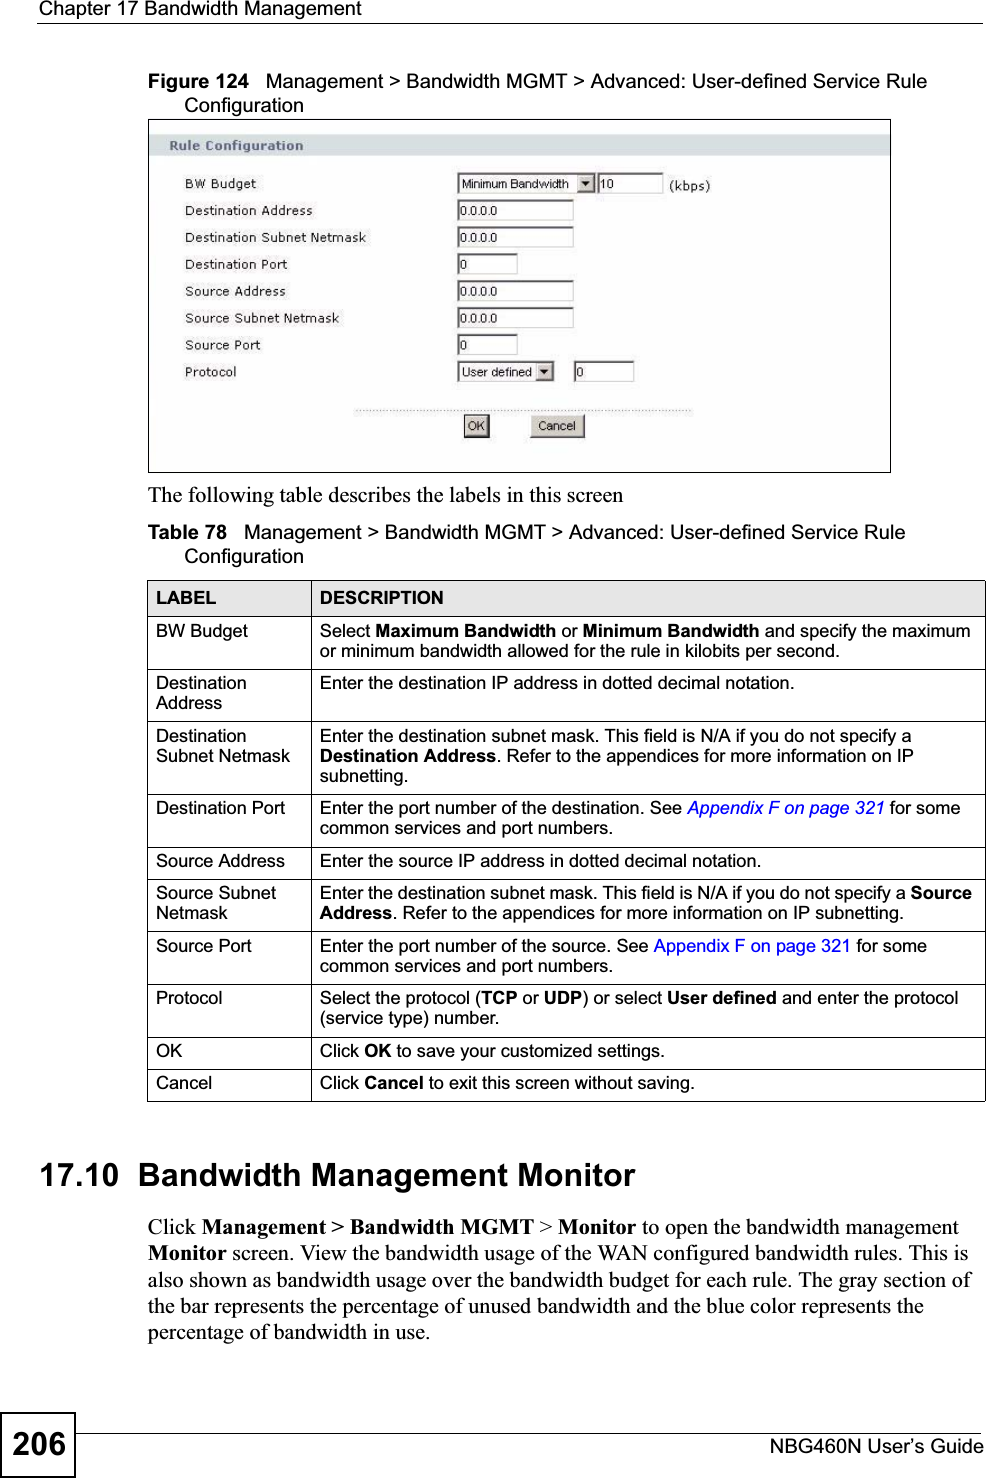 Chapter 17 Bandwidth ManagementNBG460N User’s Guide206Figure 124   Management &gt; Bandwidth MGMT &gt; Advanced: User-defined Service Rule Configuration The following table describes the labels in this screenTable 78   Management &gt; Bandwidth MGMT &gt; Advanced: User-defined Service Rule Configuration  17.10  Bandwidth Management Monitor    Click Management &gt; Bandwidth MGMT &gt; Monitor to open the bandwidth management Monitor screen. View the bandwidth usage of the WAN configured bandwidth rules. This is also shown as bandwidth usage over the bandwidth budget for each rule. The gray section of the bar represents the percentage of unused bandwidth and the blue color represents the percentage of bandwidth in use.LABEL DESCRIPTIONBW Budget Select Maximum Bandwidth or Minimum Bandwidth and specify the maximum or minimum bandwidth allowed for the rule in kilobits per second. Destination AddressEnter the destination IP address in dotted decimal notation.Destination Subnet NetmaskEnter the destination subnet mask. This field is N/A if you do not specify a Destination Address. Refer to the appendices for more information on IP subnetting.Destination Port Enter the port number of the destination. See Appendix F on page 321 for some common services and port numbers.Source Address Enter the source IP address in dotted decimal notation.Source Subnet NetmaskEnter the destination subnet mask. This field is N/A if you do not specify a Source Address. Refer to the appendices for more information on IP subnetting.Source Port Enter the port number of the source. See Appendix F on page 321 for some common services and port numbers.Protocol Select the protocol (TCP or UDP) or select User defined and enter the protocol (service type) number. OK Click OK to save your customized settings.Cancel Click Cancel to exit this screen without saving.